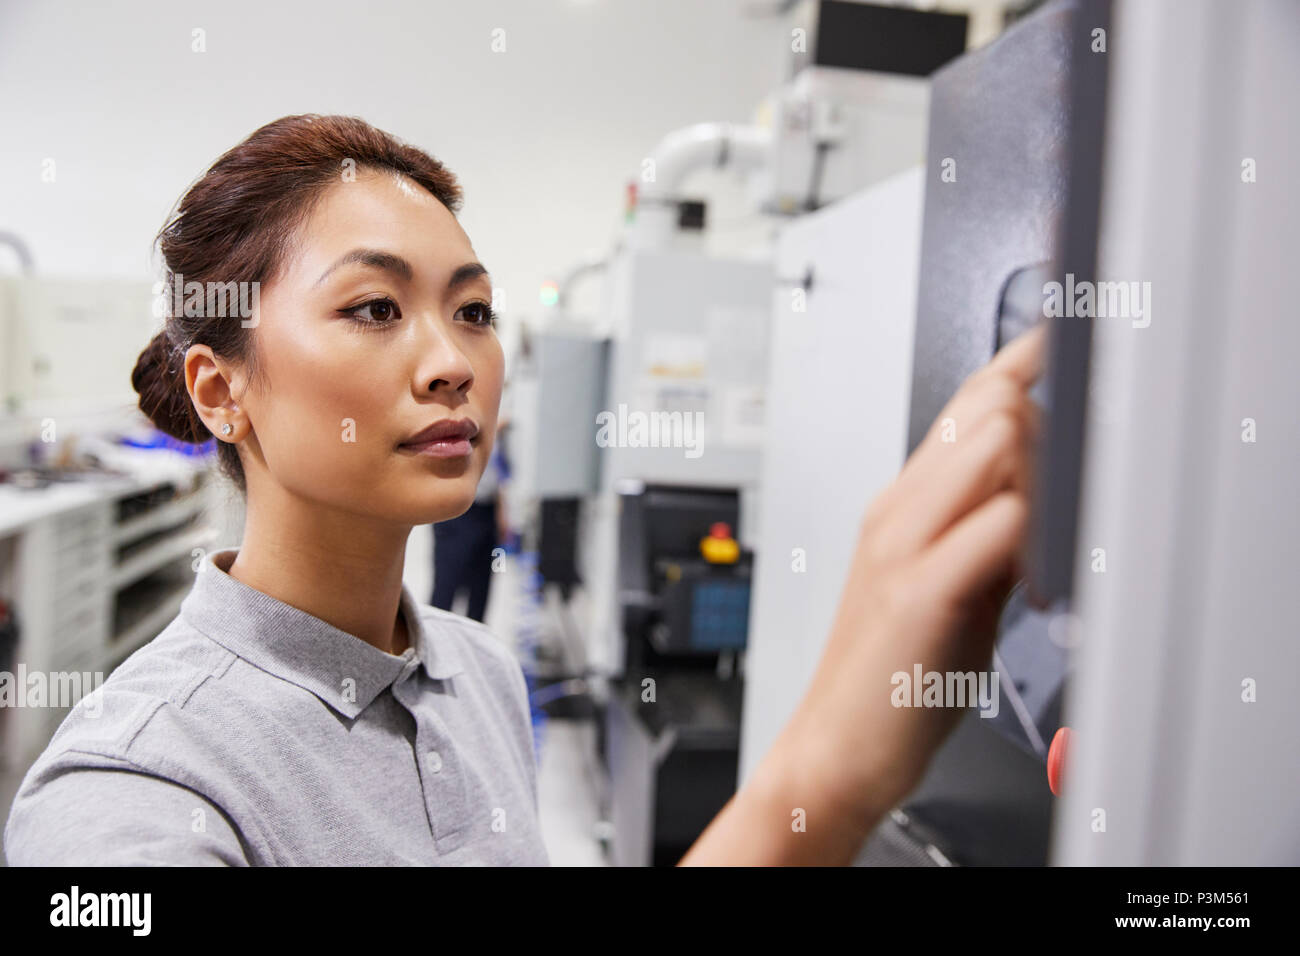 Female Engineer Operating CNC Machinery In Factory Stock Photo